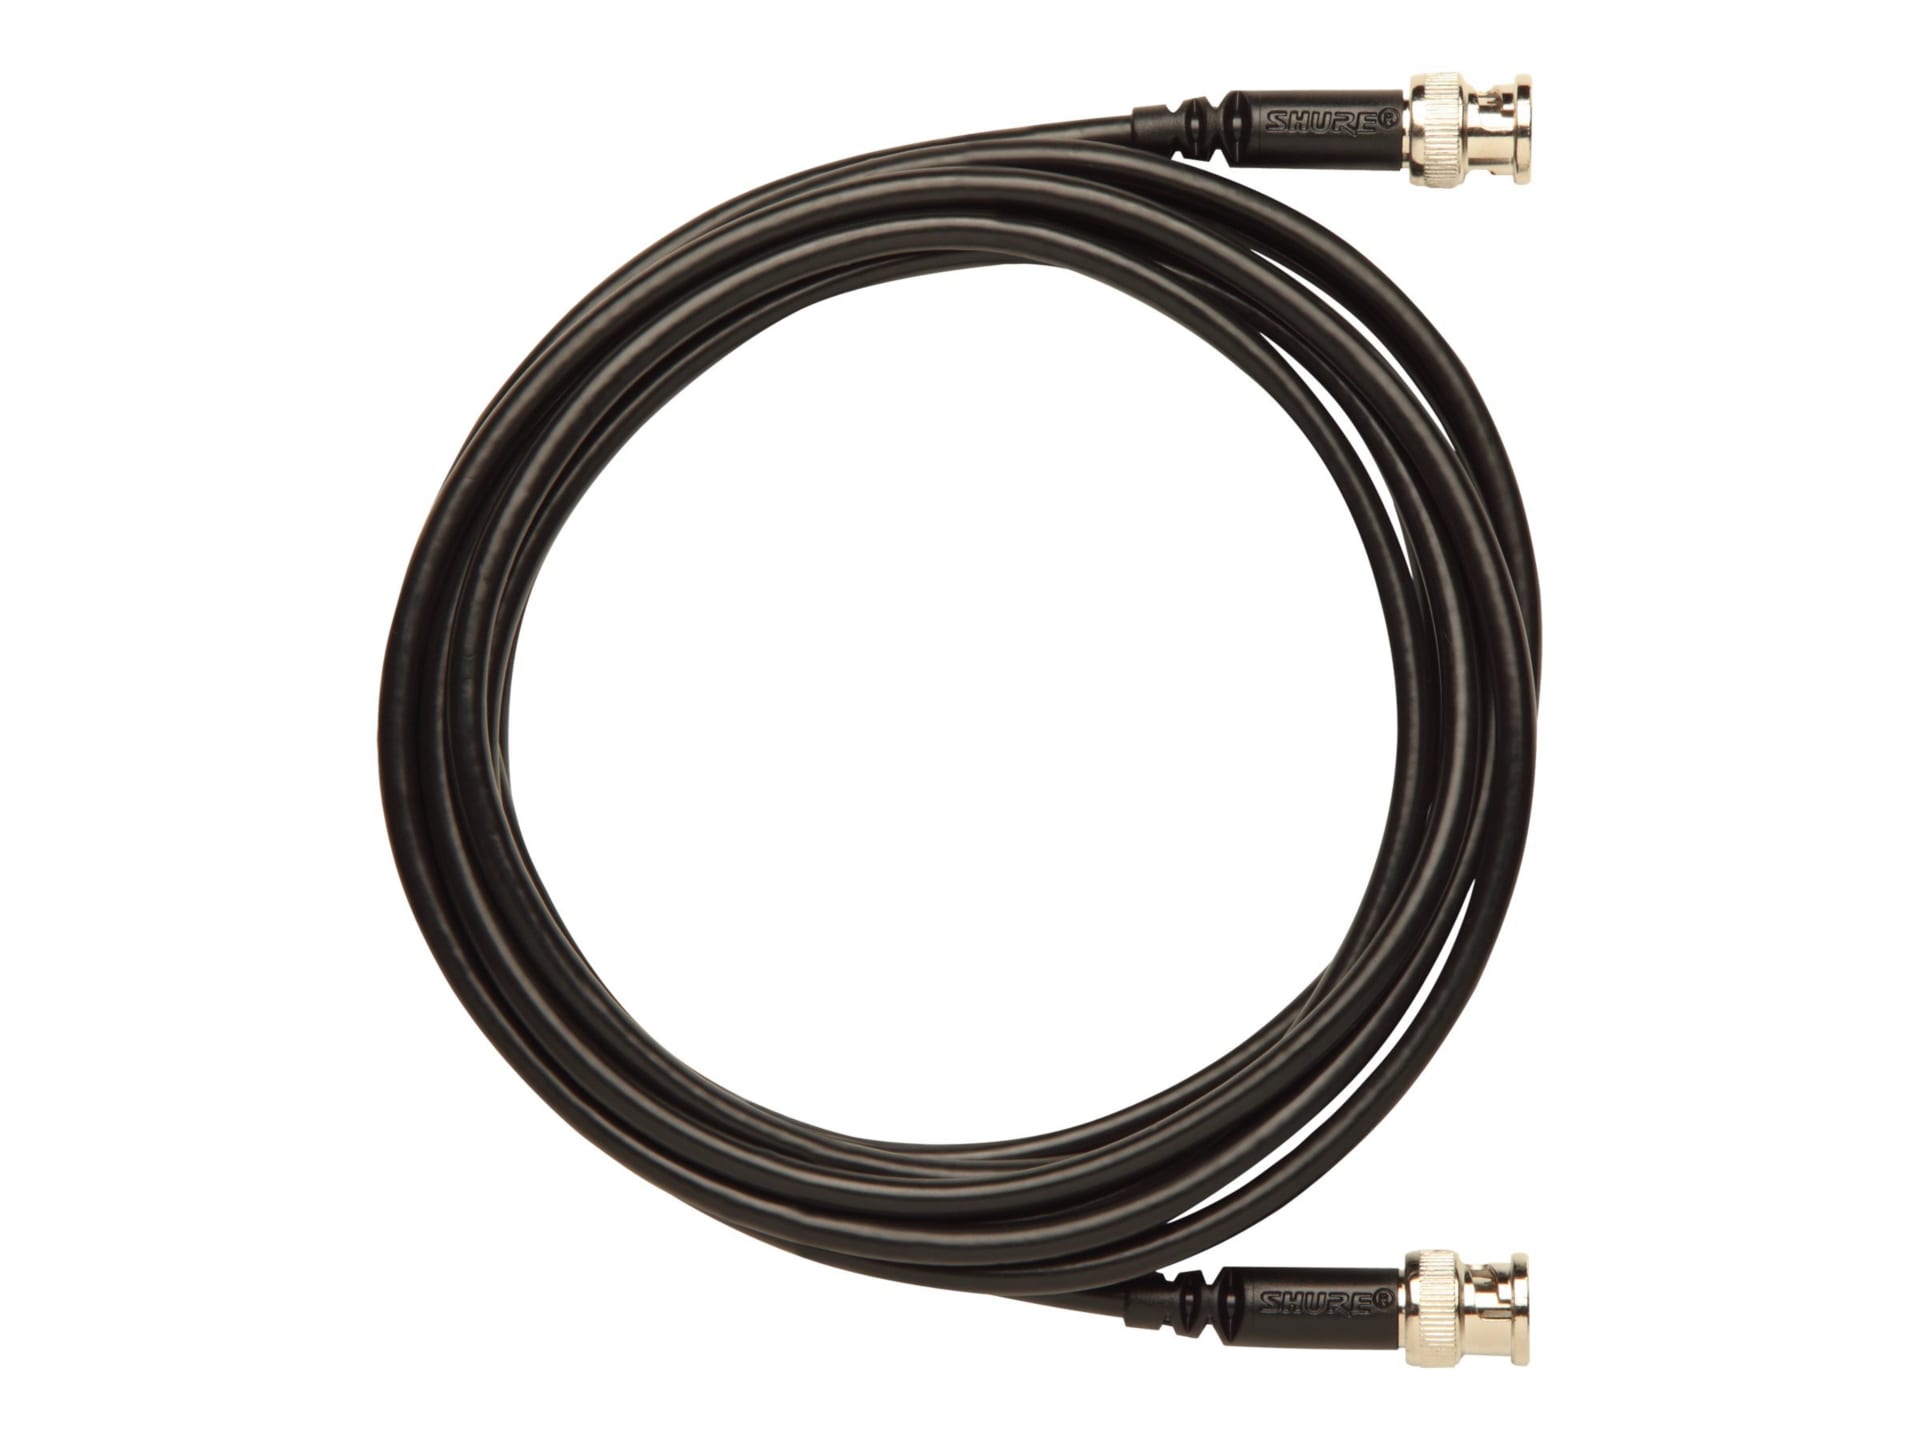 Shure antenna cable - 10 ft